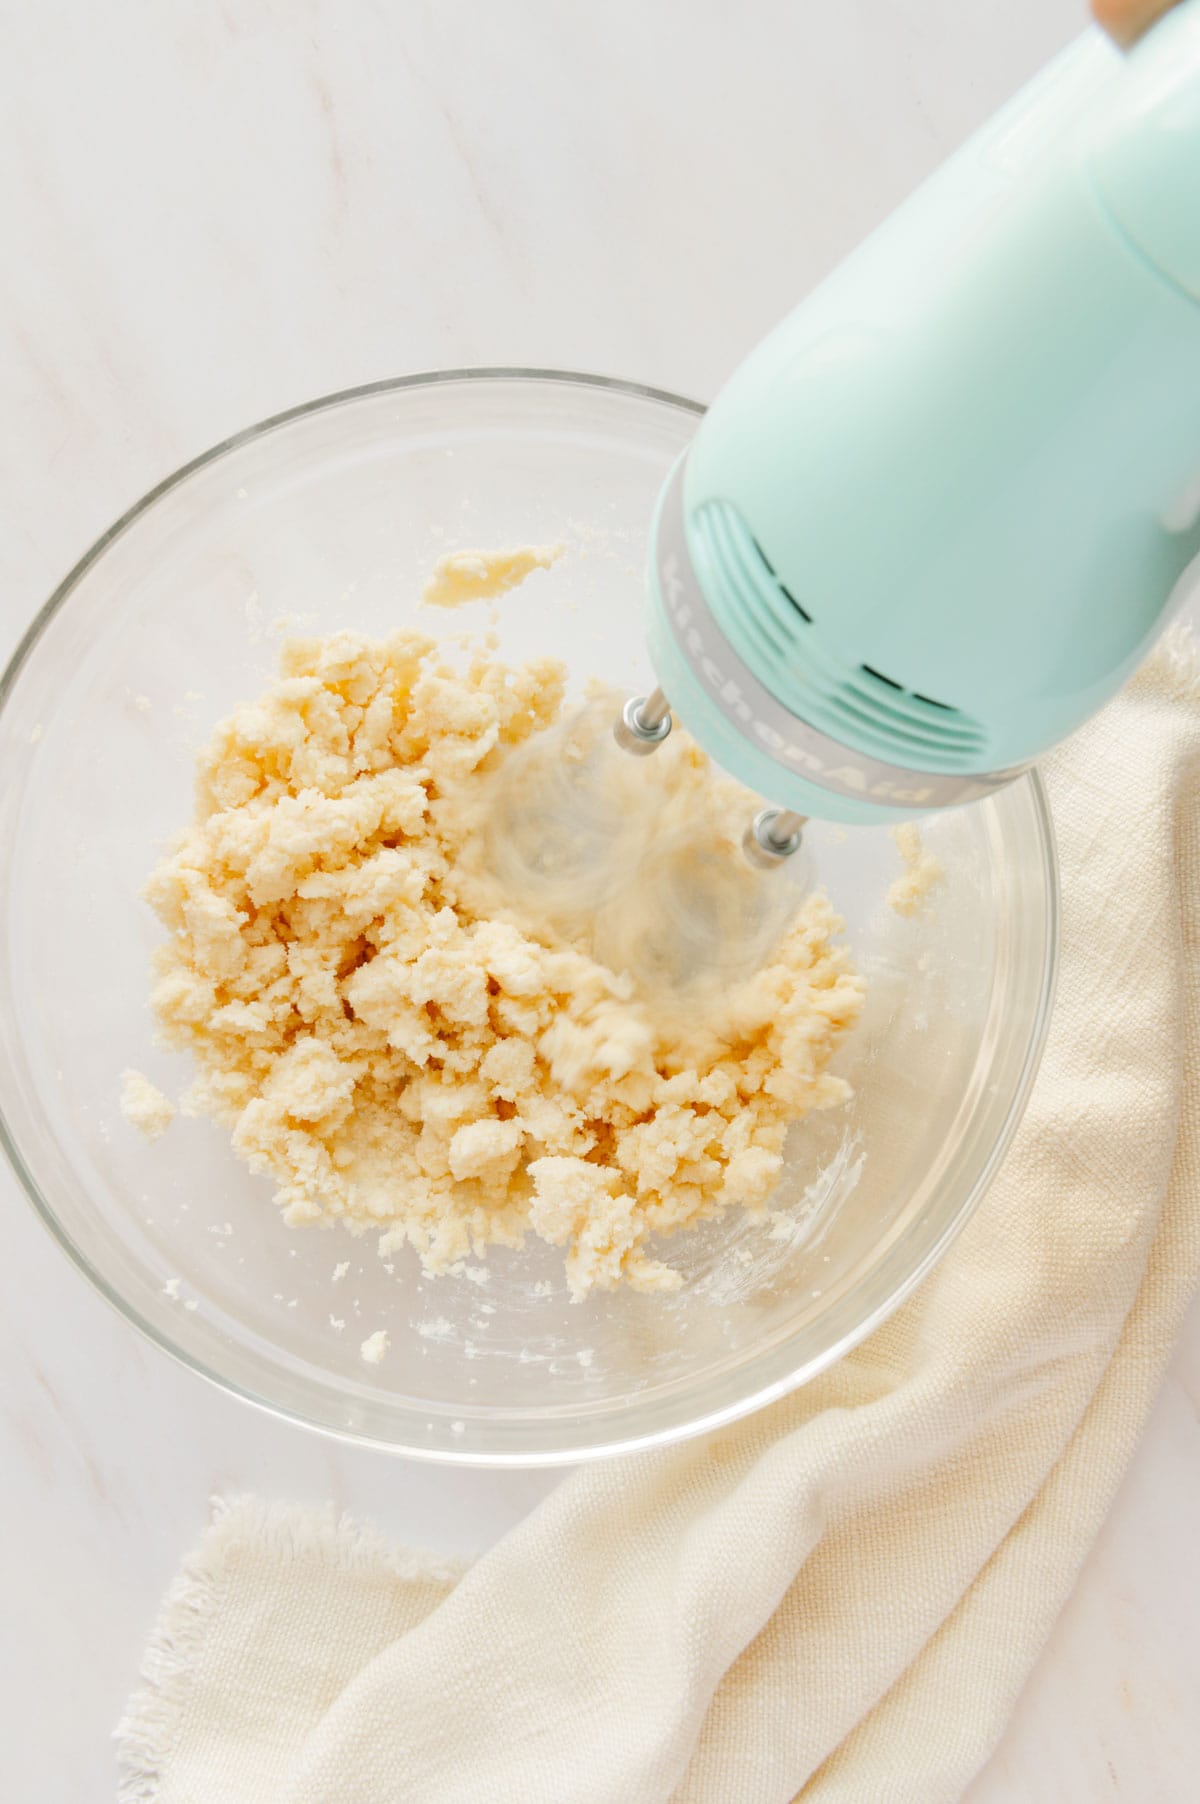 Vegan butter and sugar being whipped together with a hand mixer.